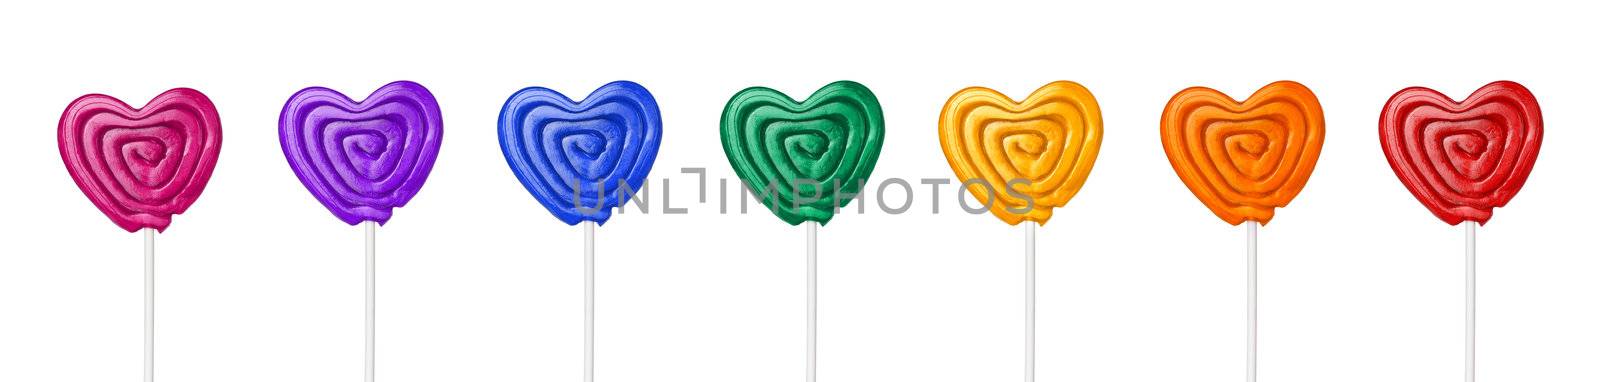  colorful heart shape lollipop on white background